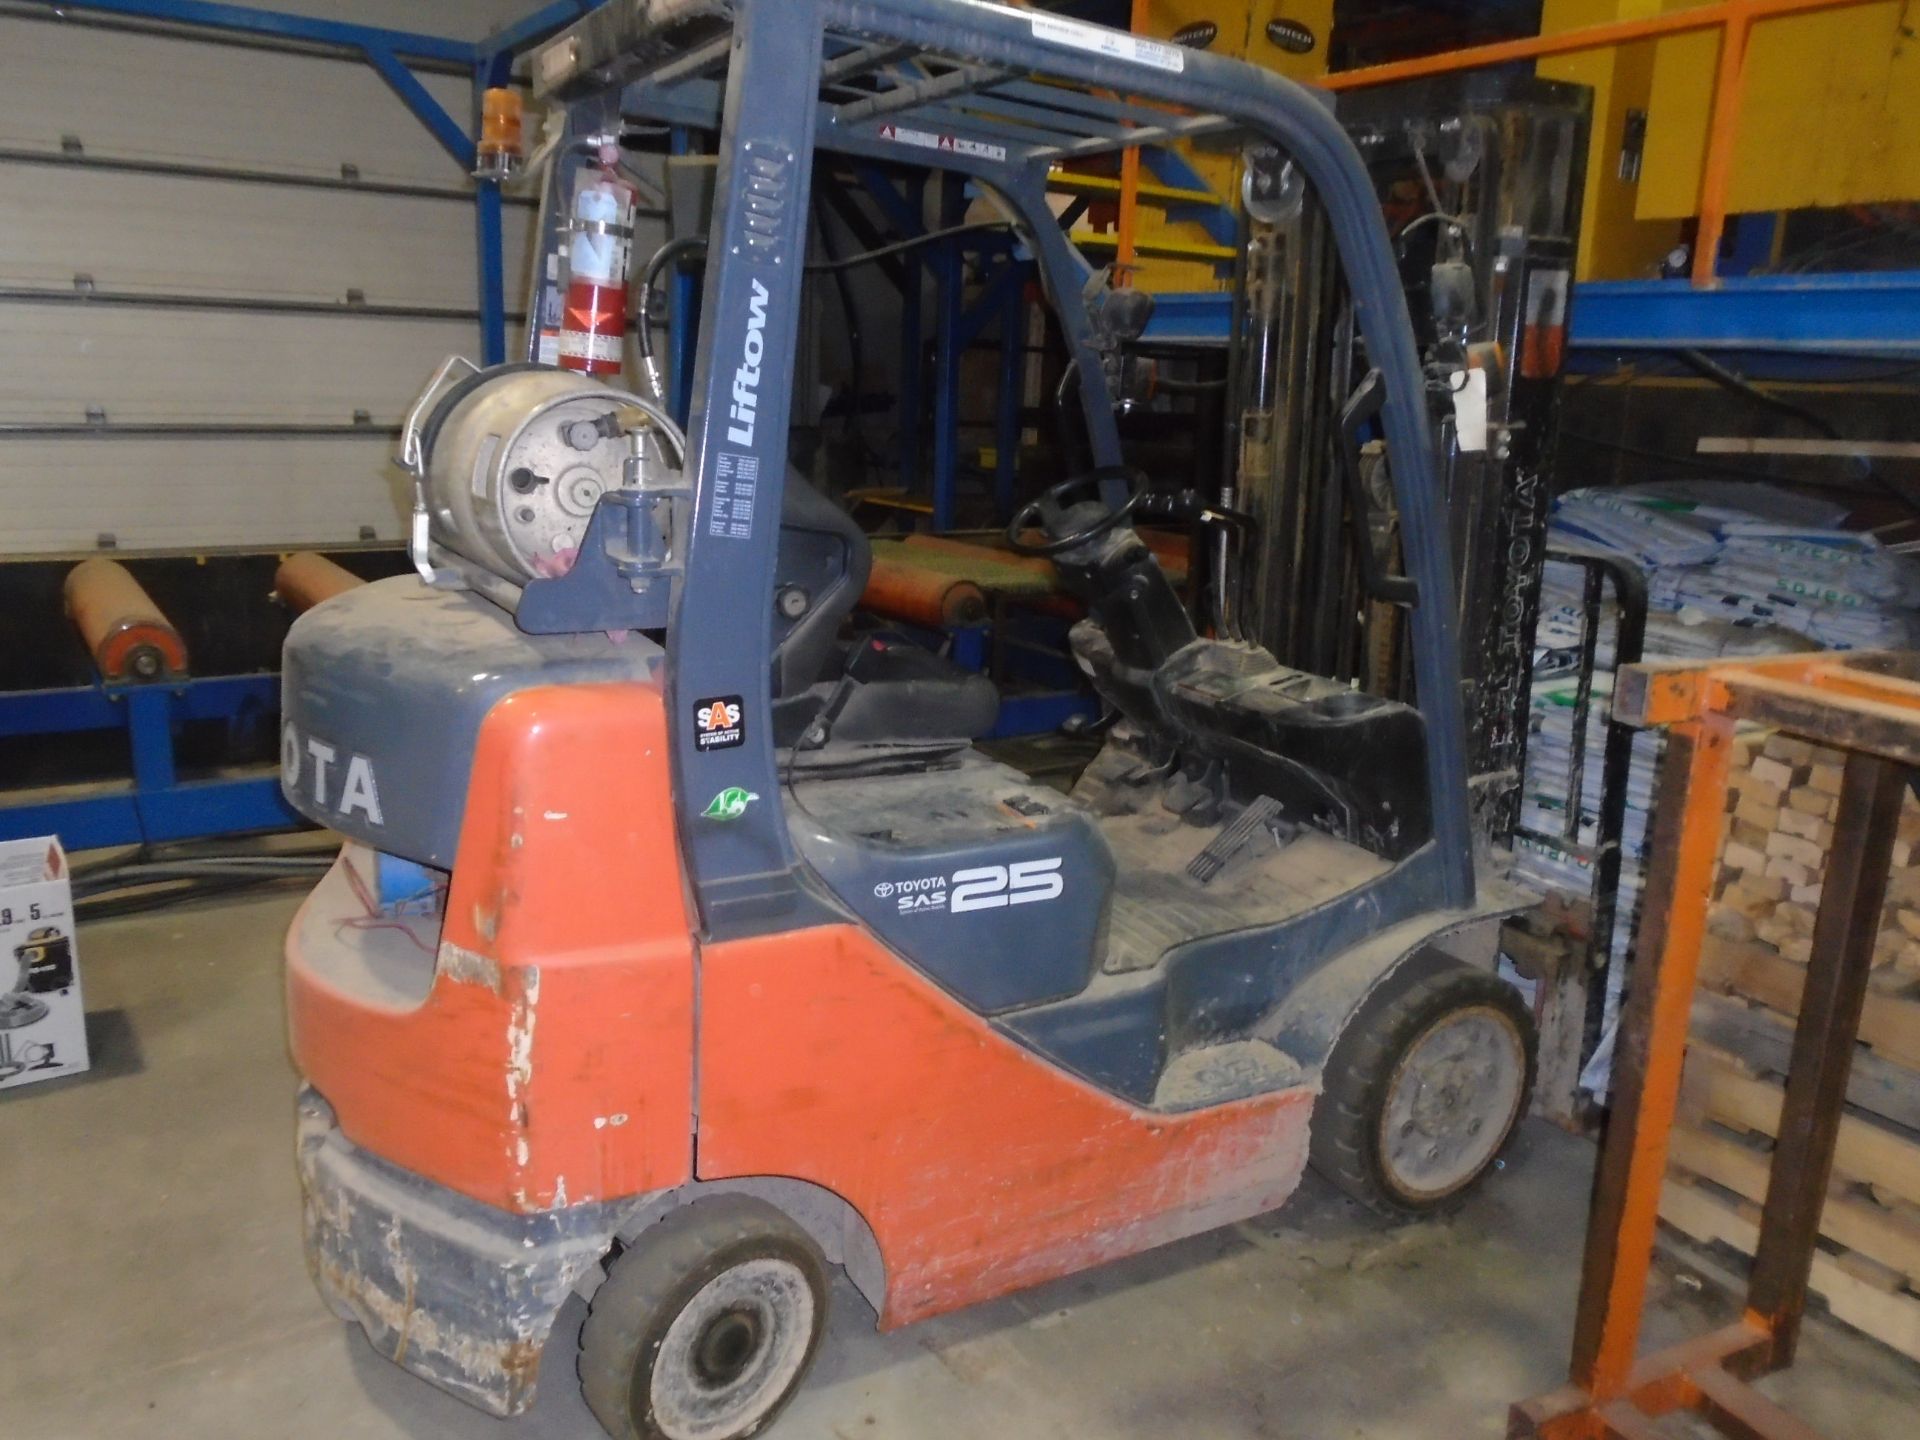 TOYOTA 8FGCU25 LPG FORKLIFT WITH 4500 LB. CAPACITY, 189" MAX. VERTICAL LIFT, SIDE SHIFT, CUSHION - Image 2 of 3